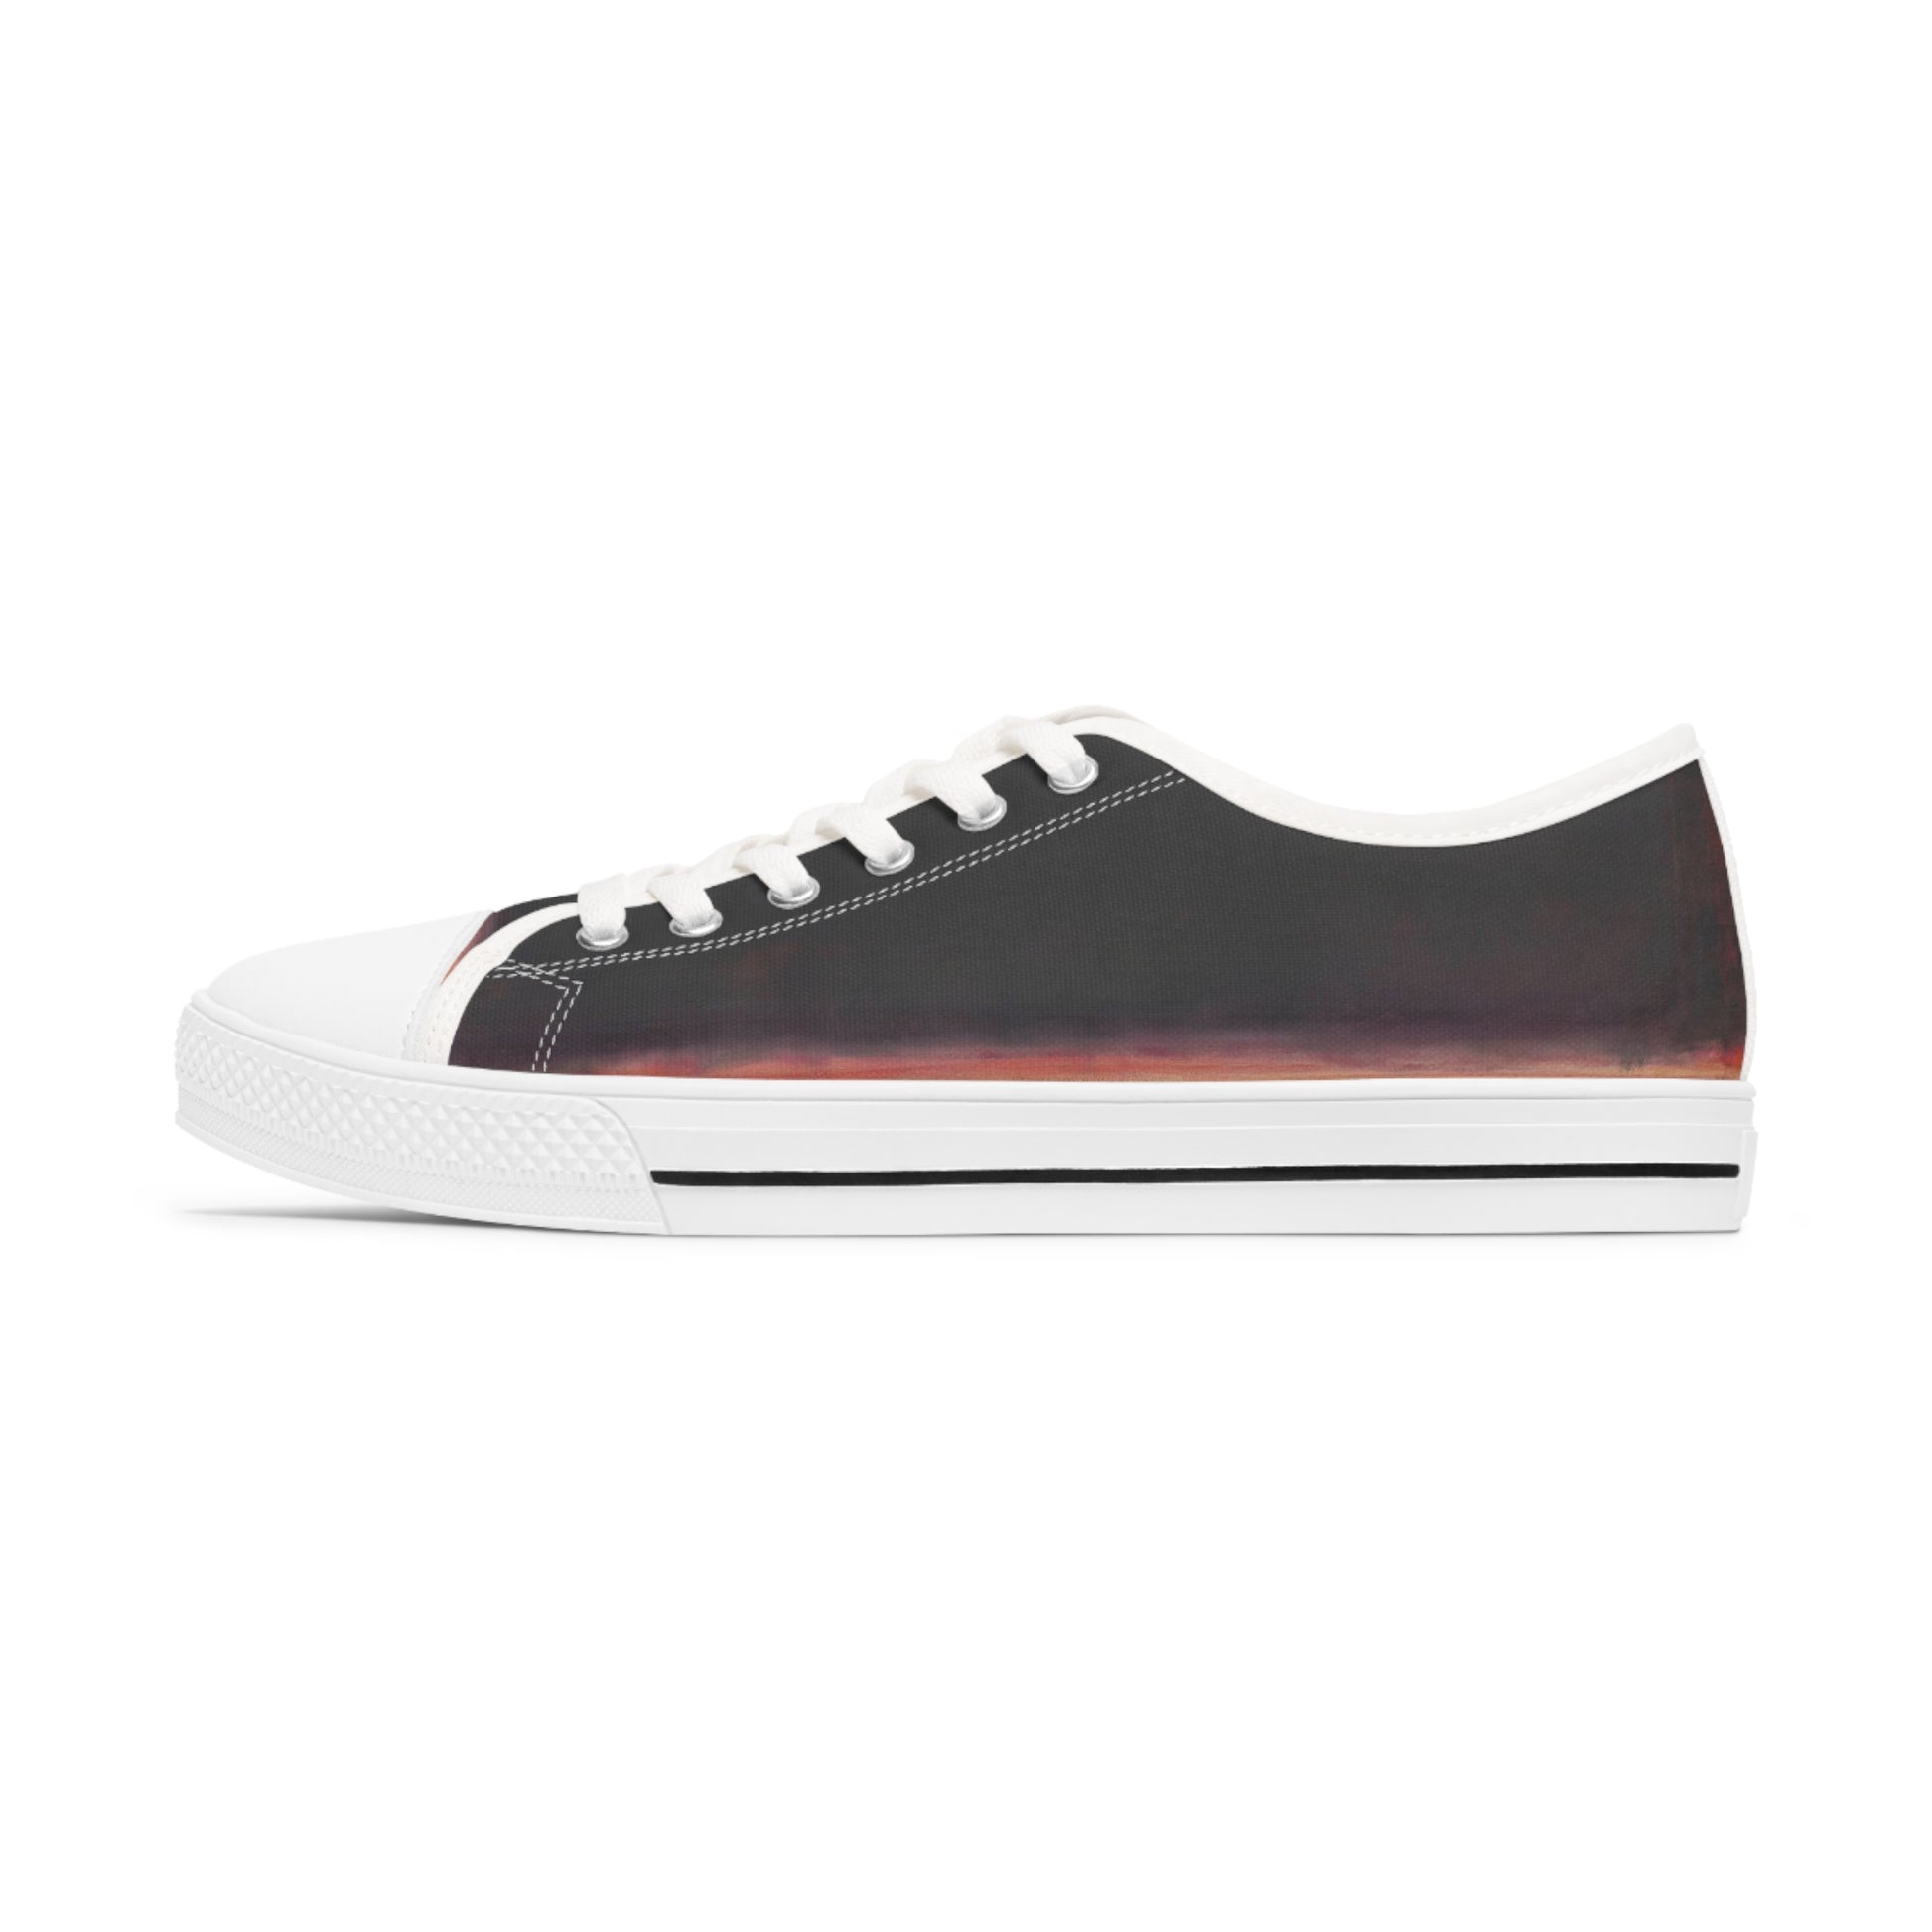 MARK ROTHKO - ABSTRACT - LOW TOP ART SNEAKERS 